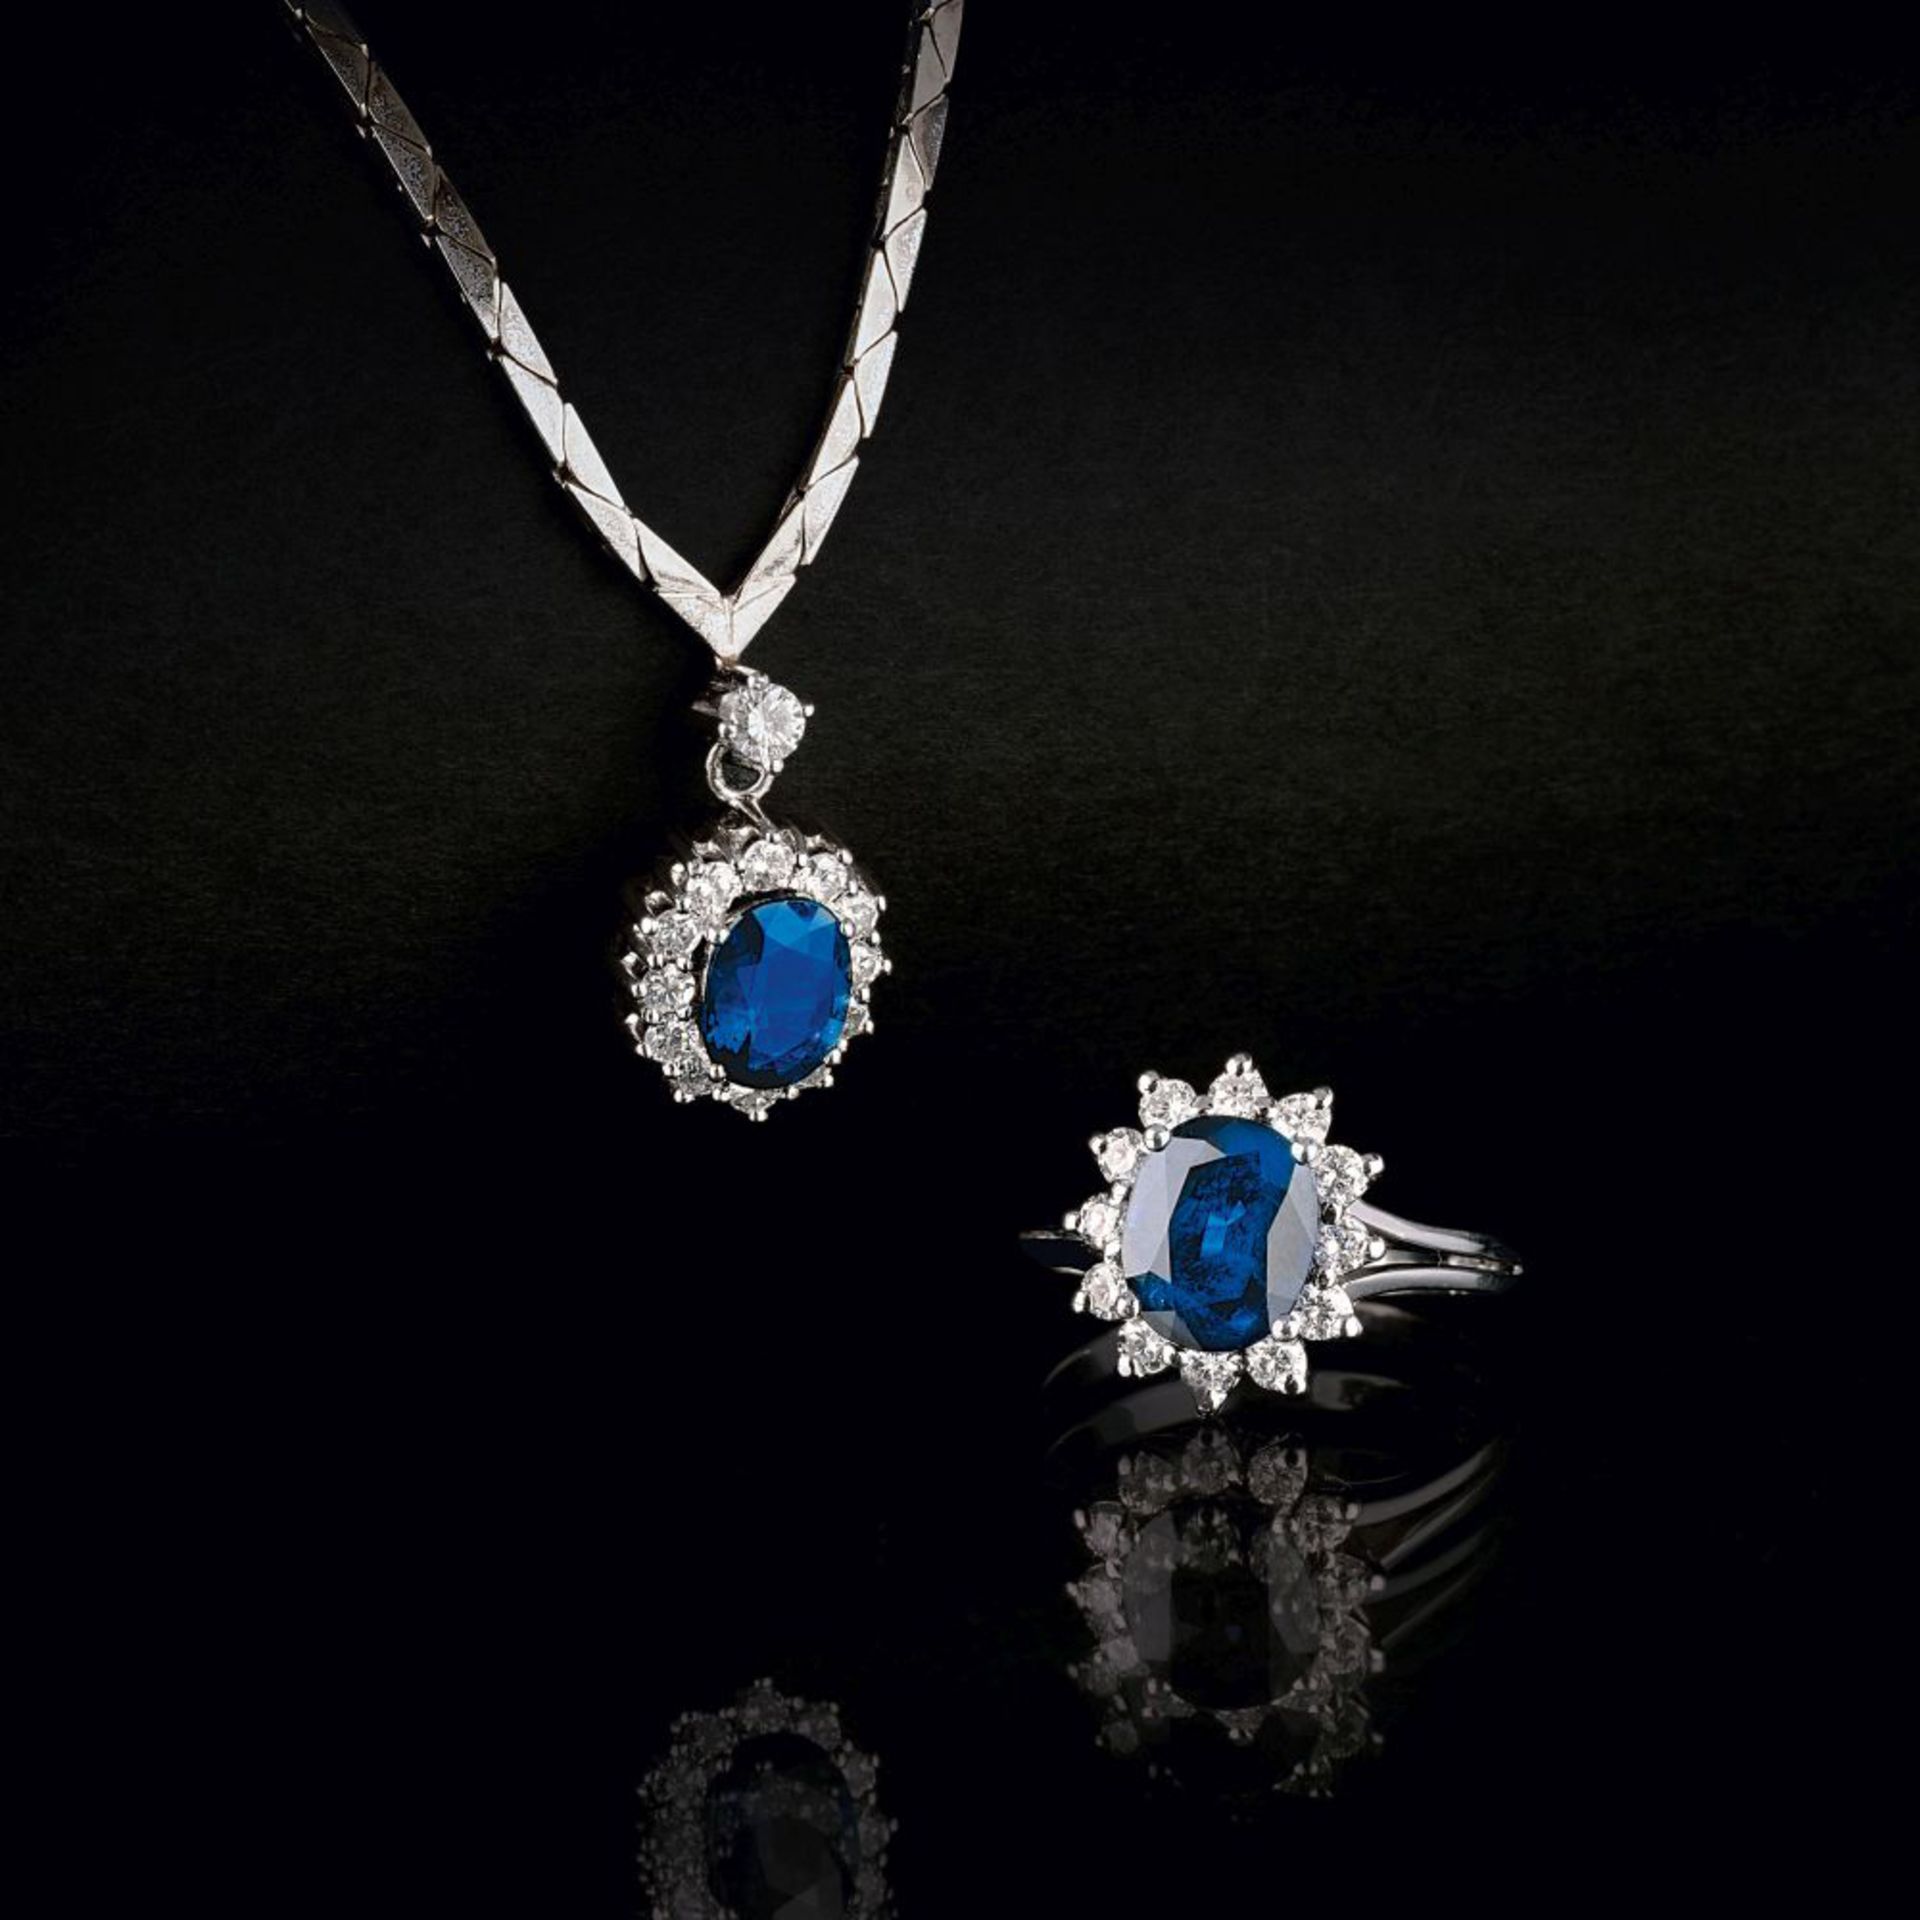 A Sapphire Diamond Ring with matching Pendant on Necklace.